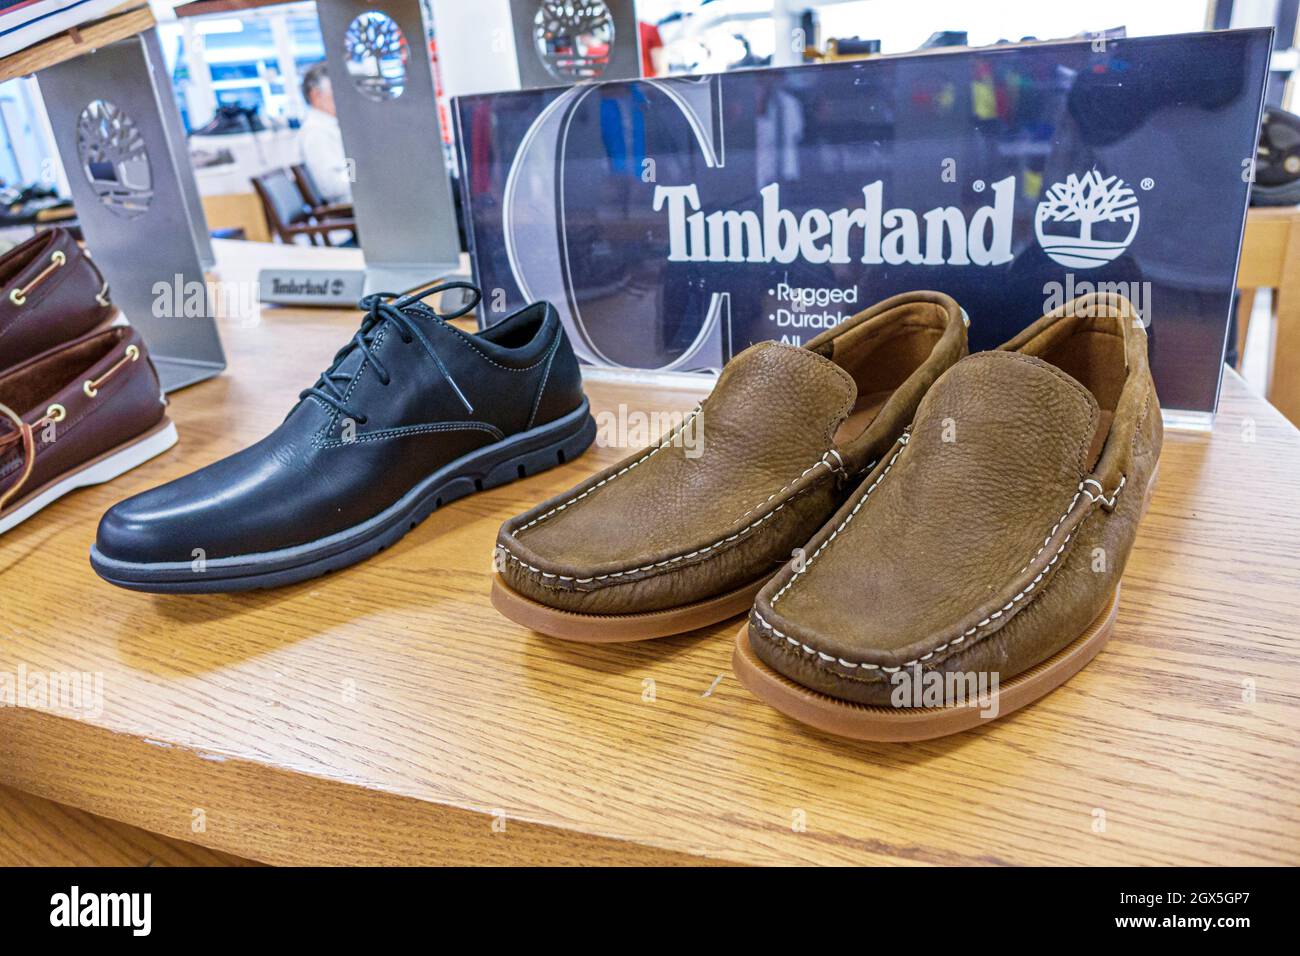 Miami Florida, Macy's, grand magasin, shopping intérieur exposition vente  Timberland chaussures pour hommes mode Photo Stock - Alamy